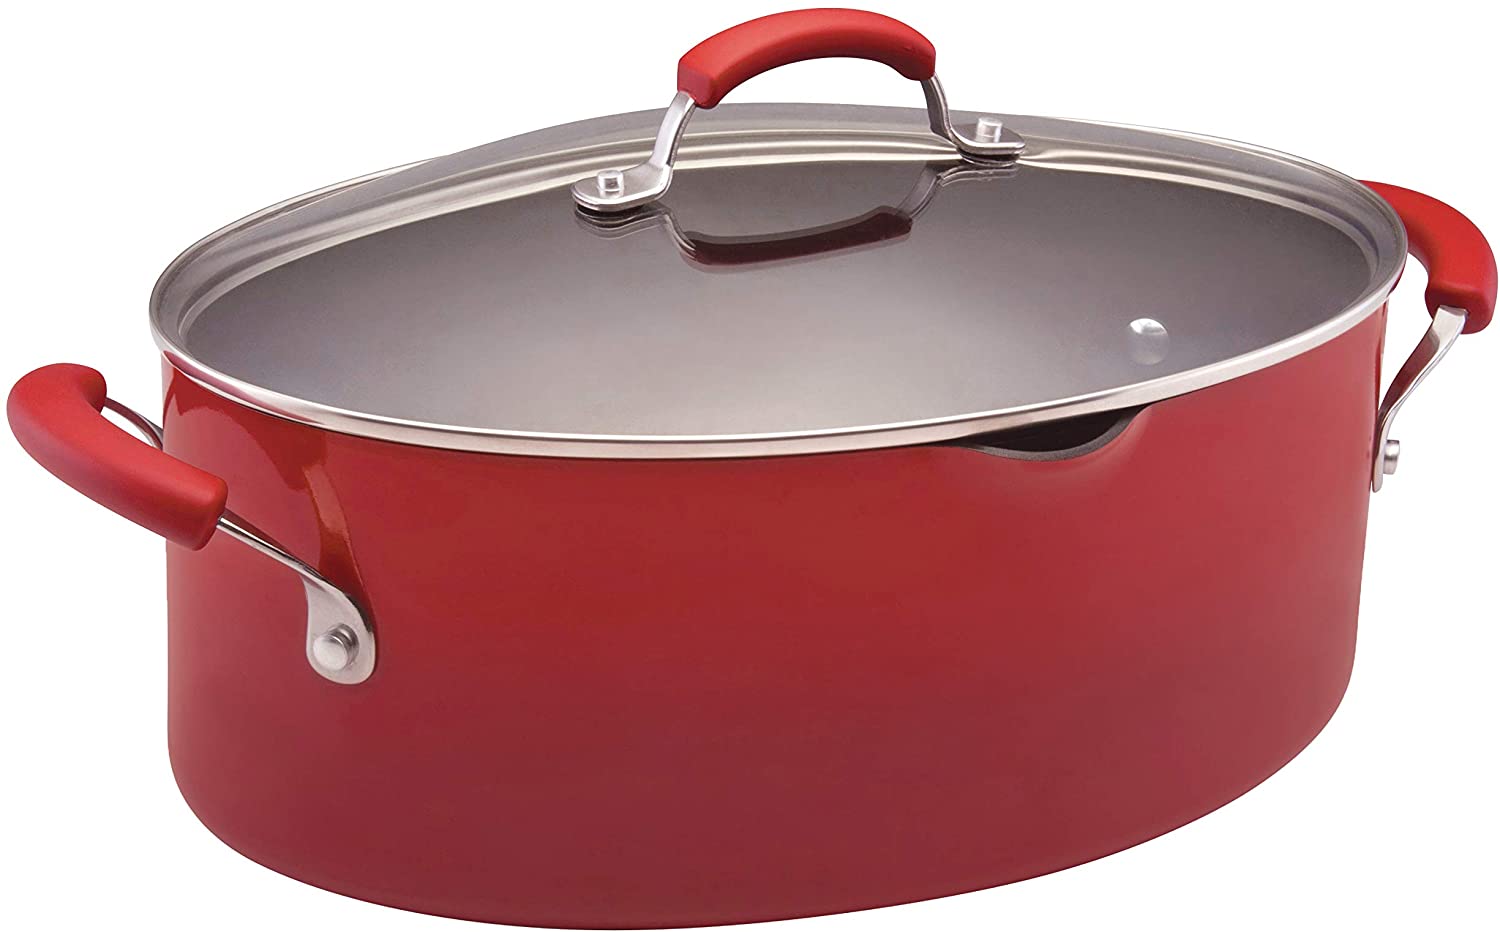 Rachael Ray Brights Nonstick Pasta Stock Pot with Lid and Spout, 8 Quart, Red Gradient